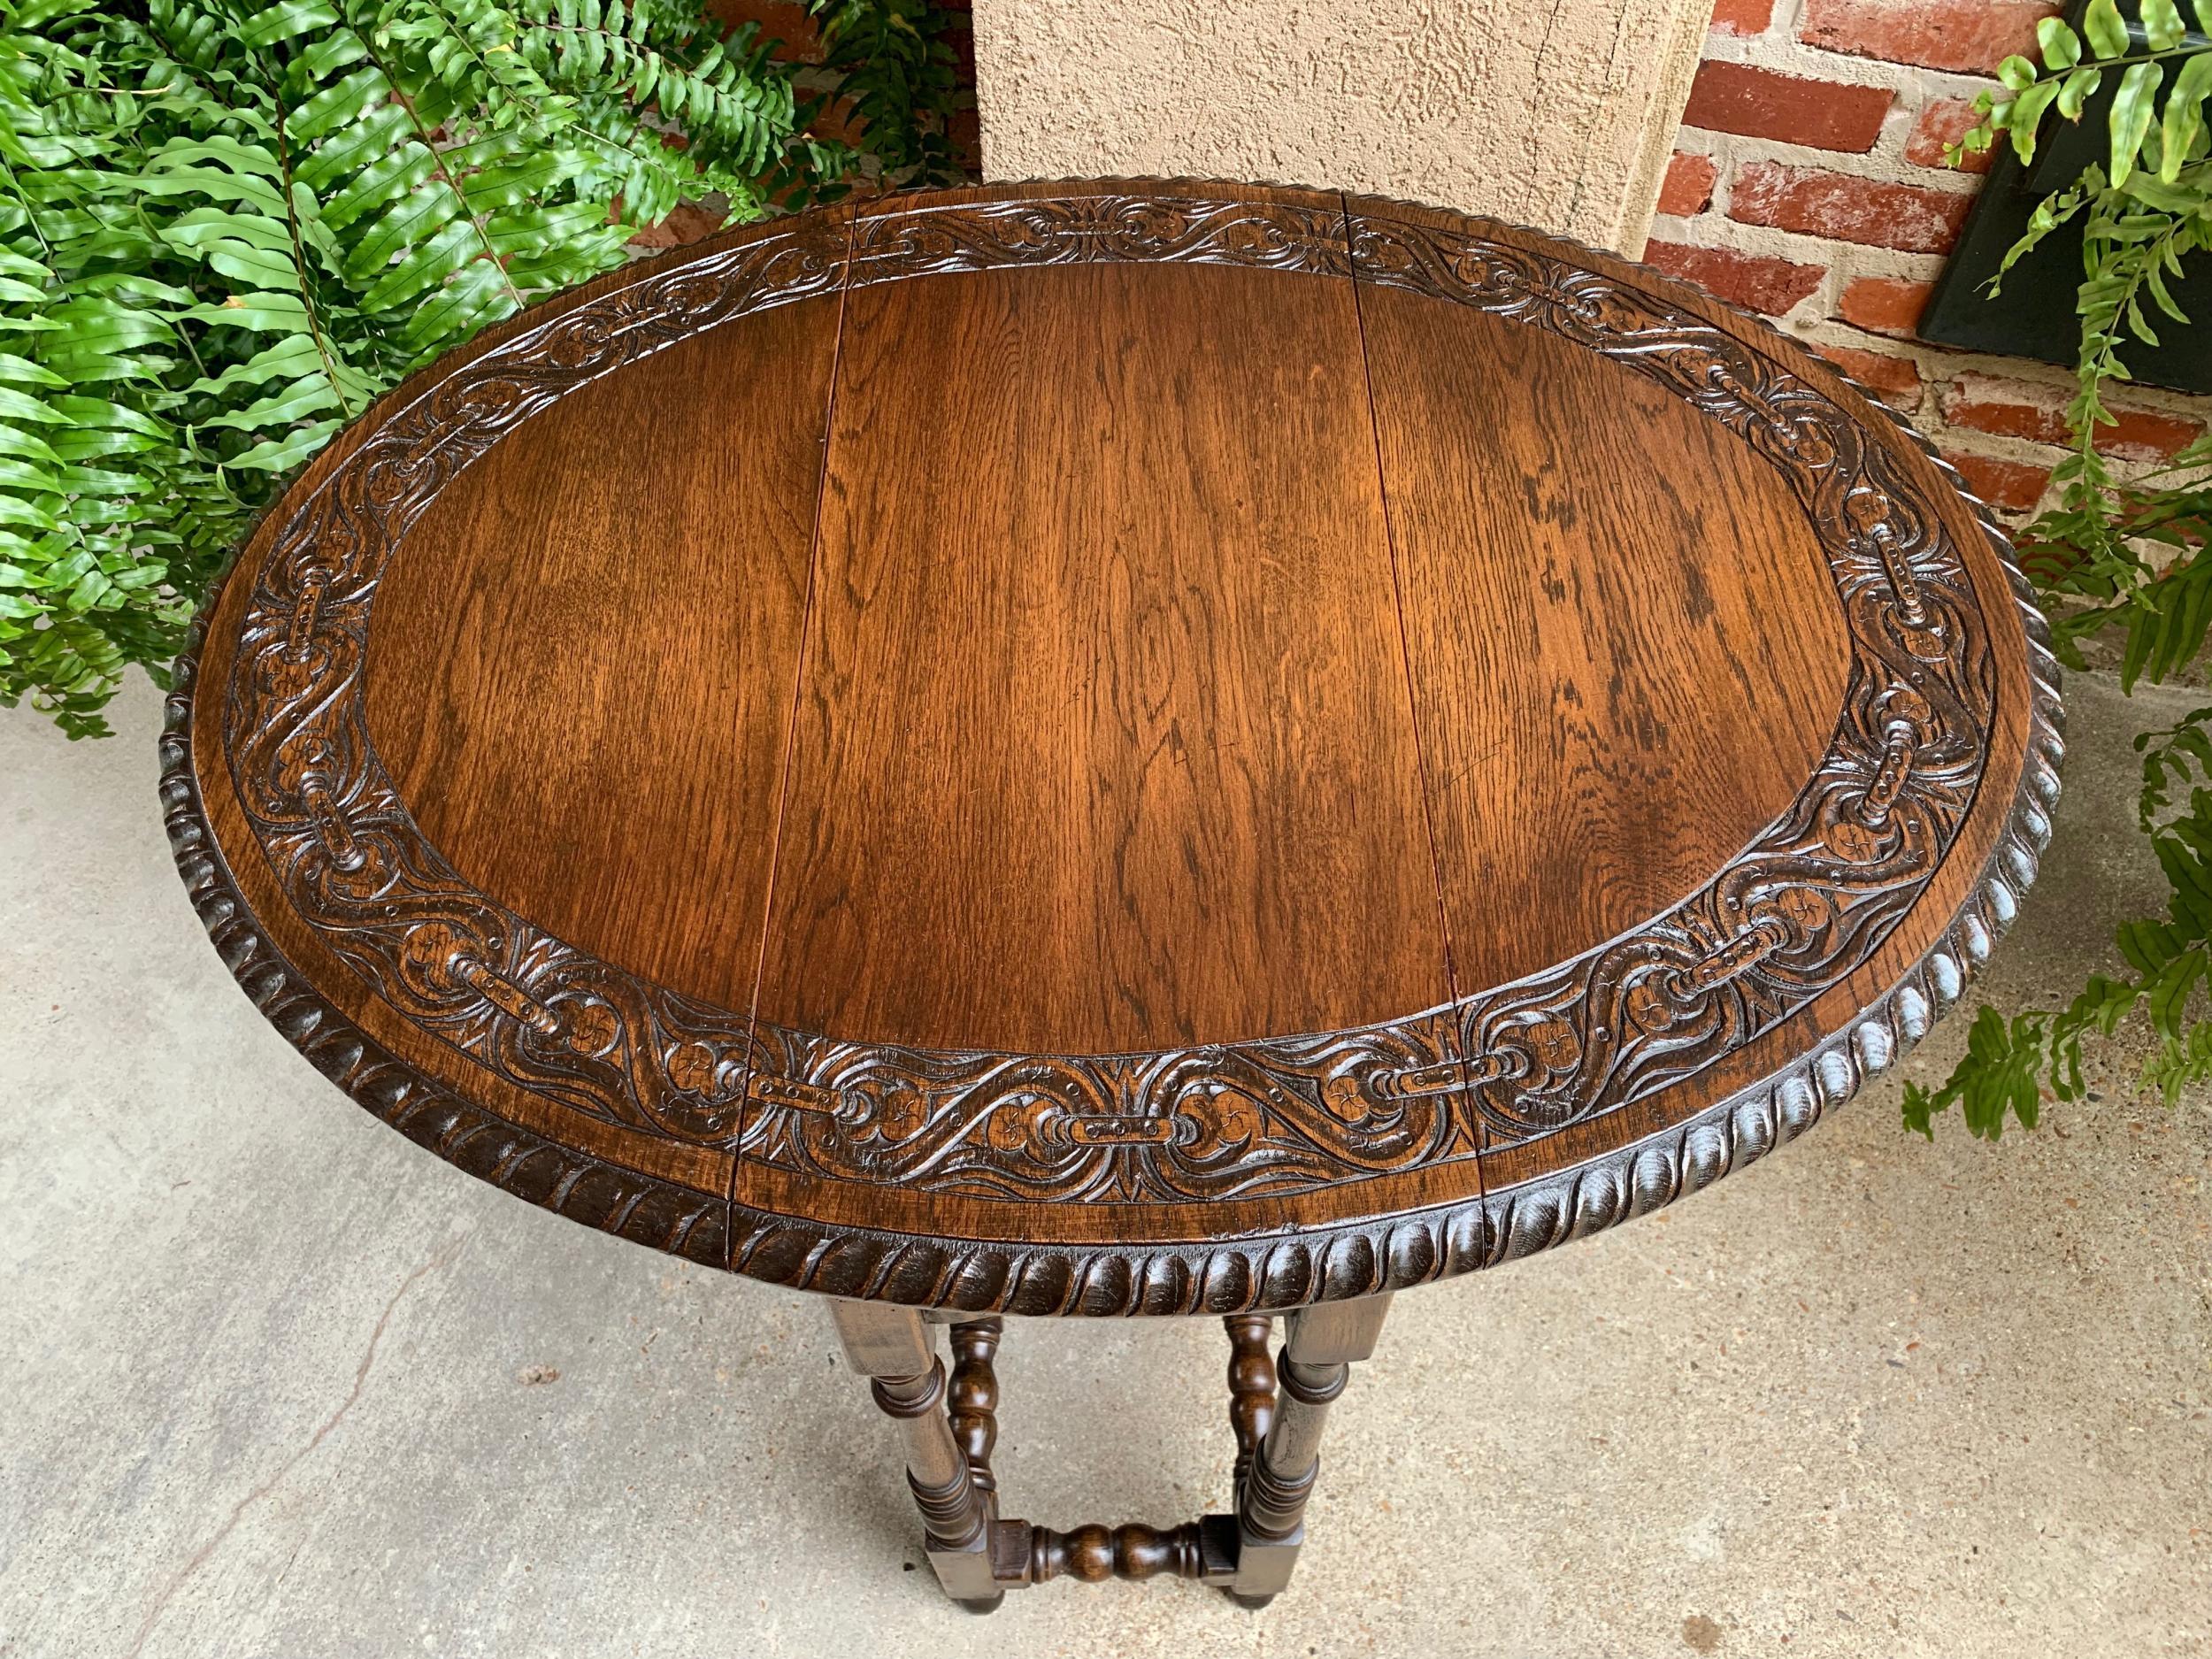 Early 20th Century Petite Antique English Oak Side Sofa Wine Table Drop Leaf Gate Leg Carved Oval